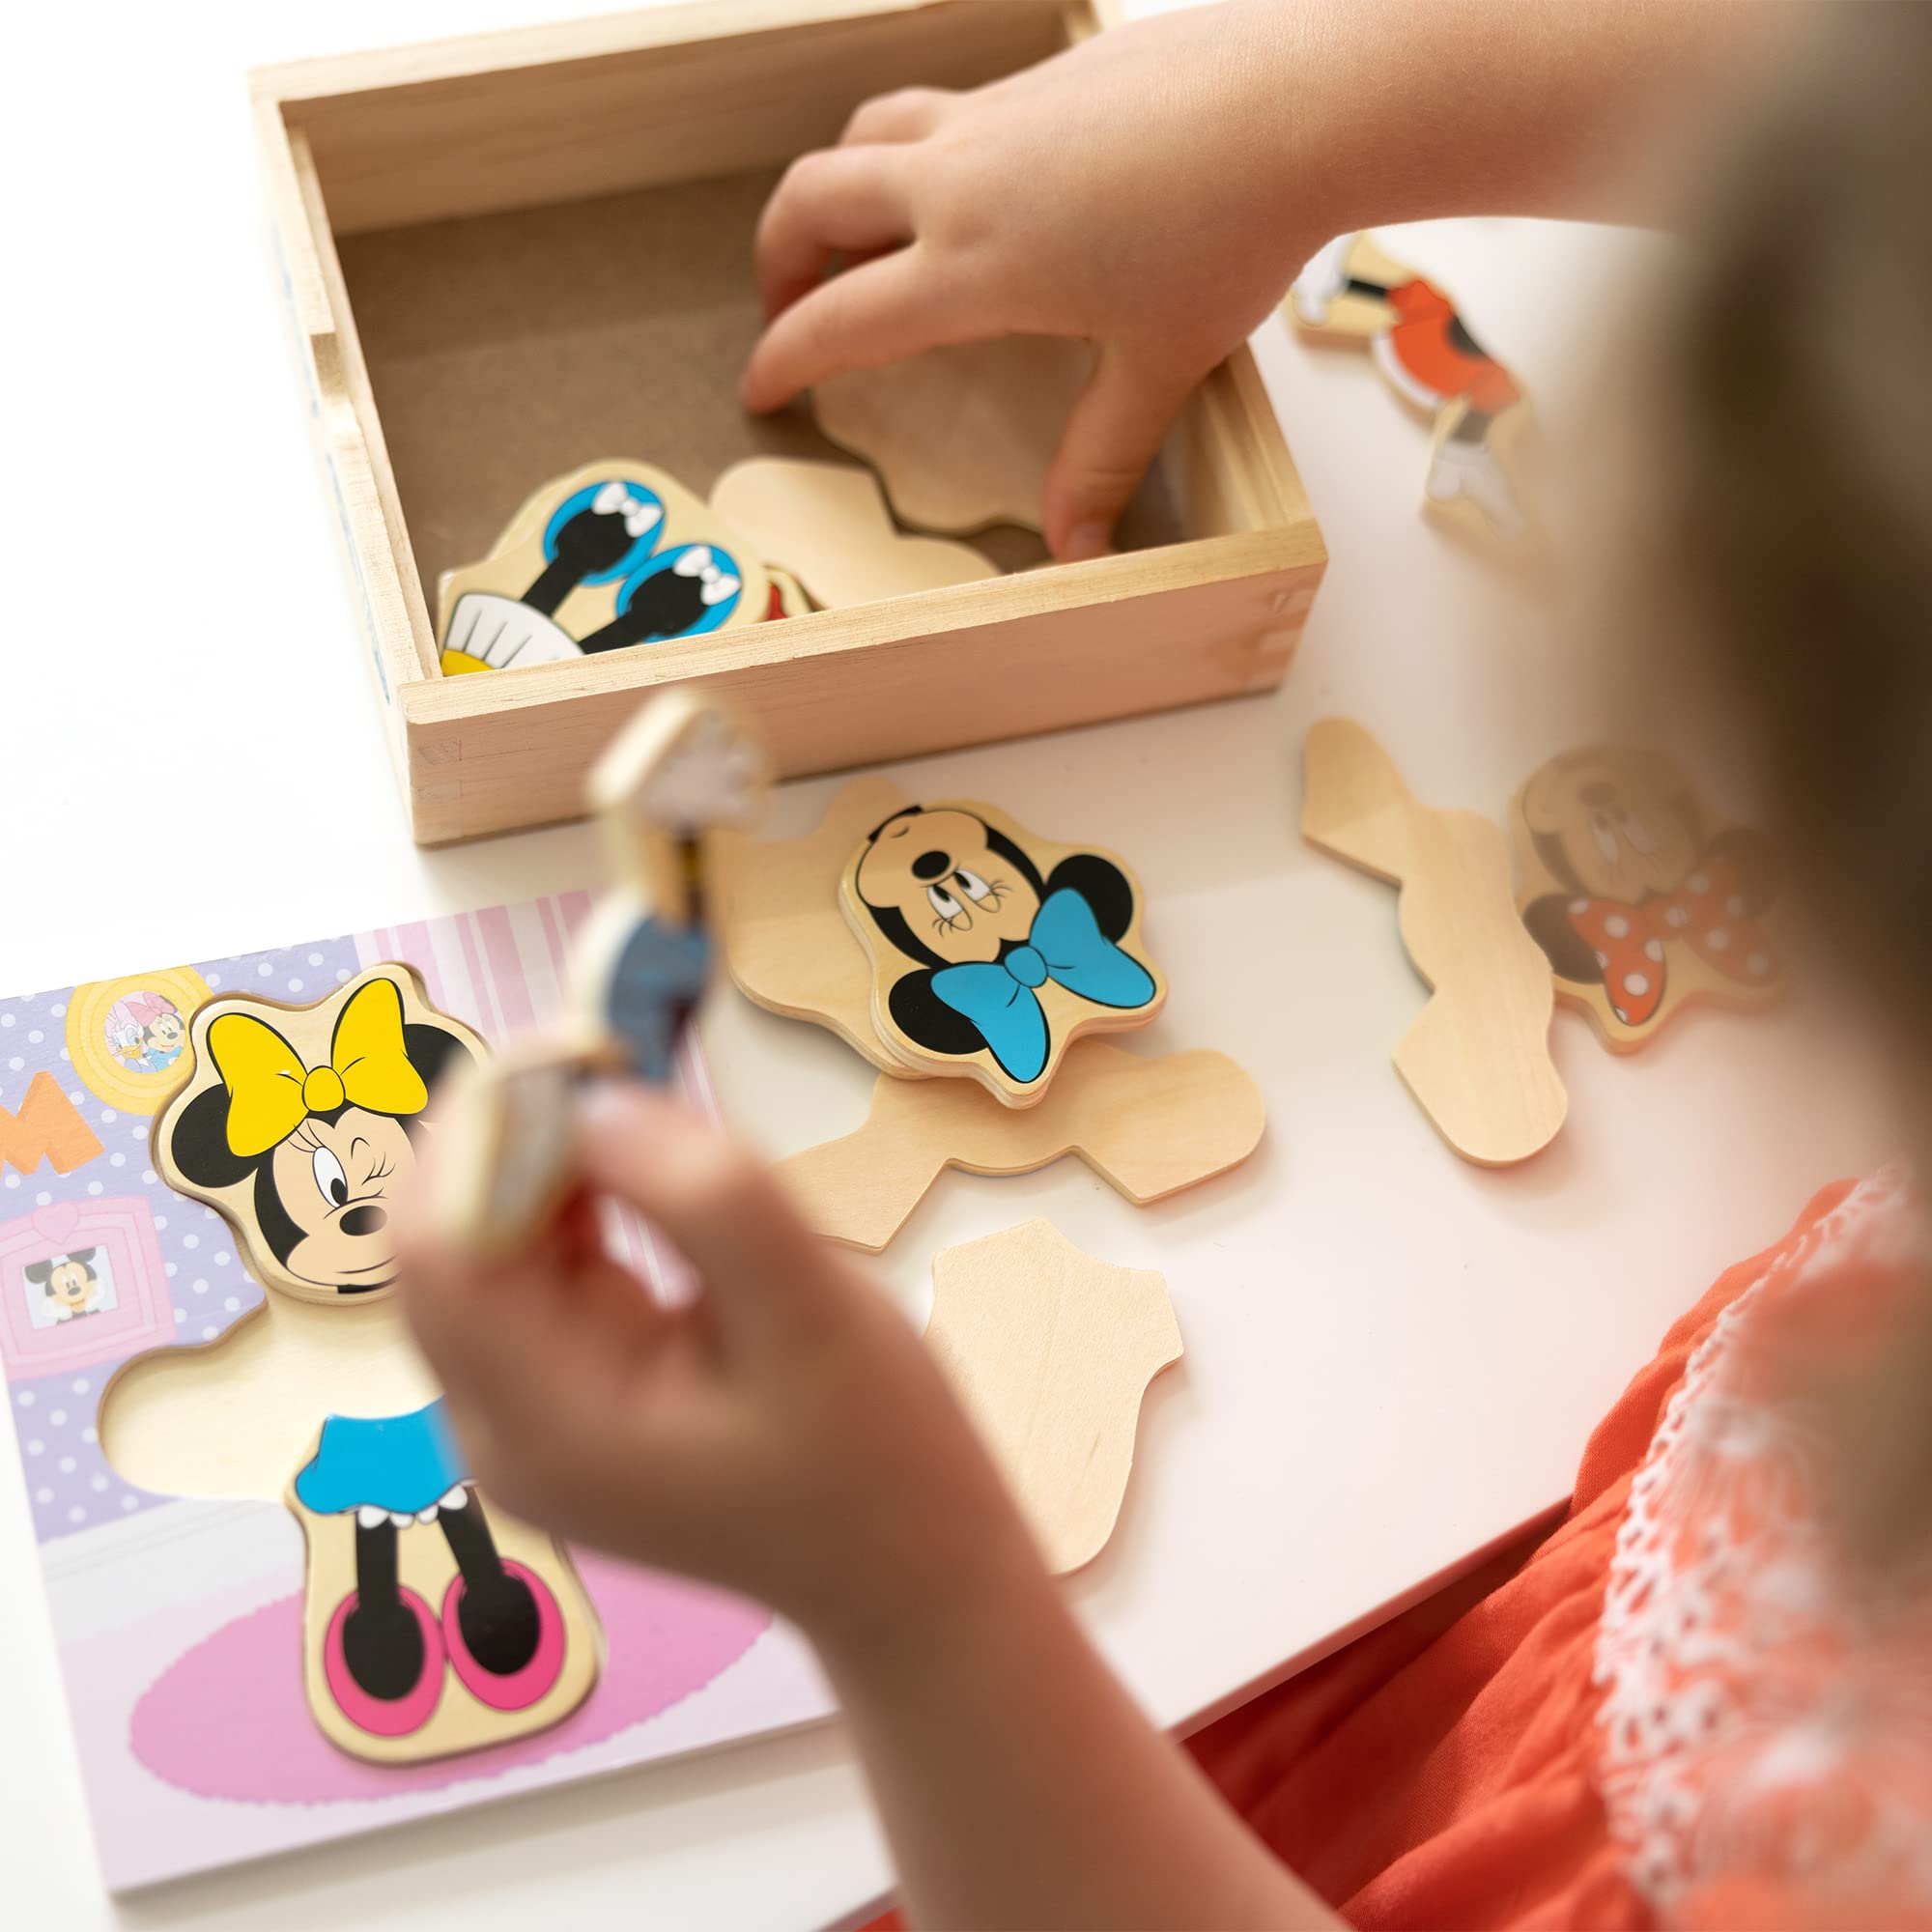 Melissa & Doug Disney Minnie Mouse Mix and Match Dress-Up Wooden Play Set (18 pcs) - Minnie Mouse Toys For Disney Fans, Minnie Mouse Fashion Puzzle Toy, Travel Toys For Kids Ages 3+